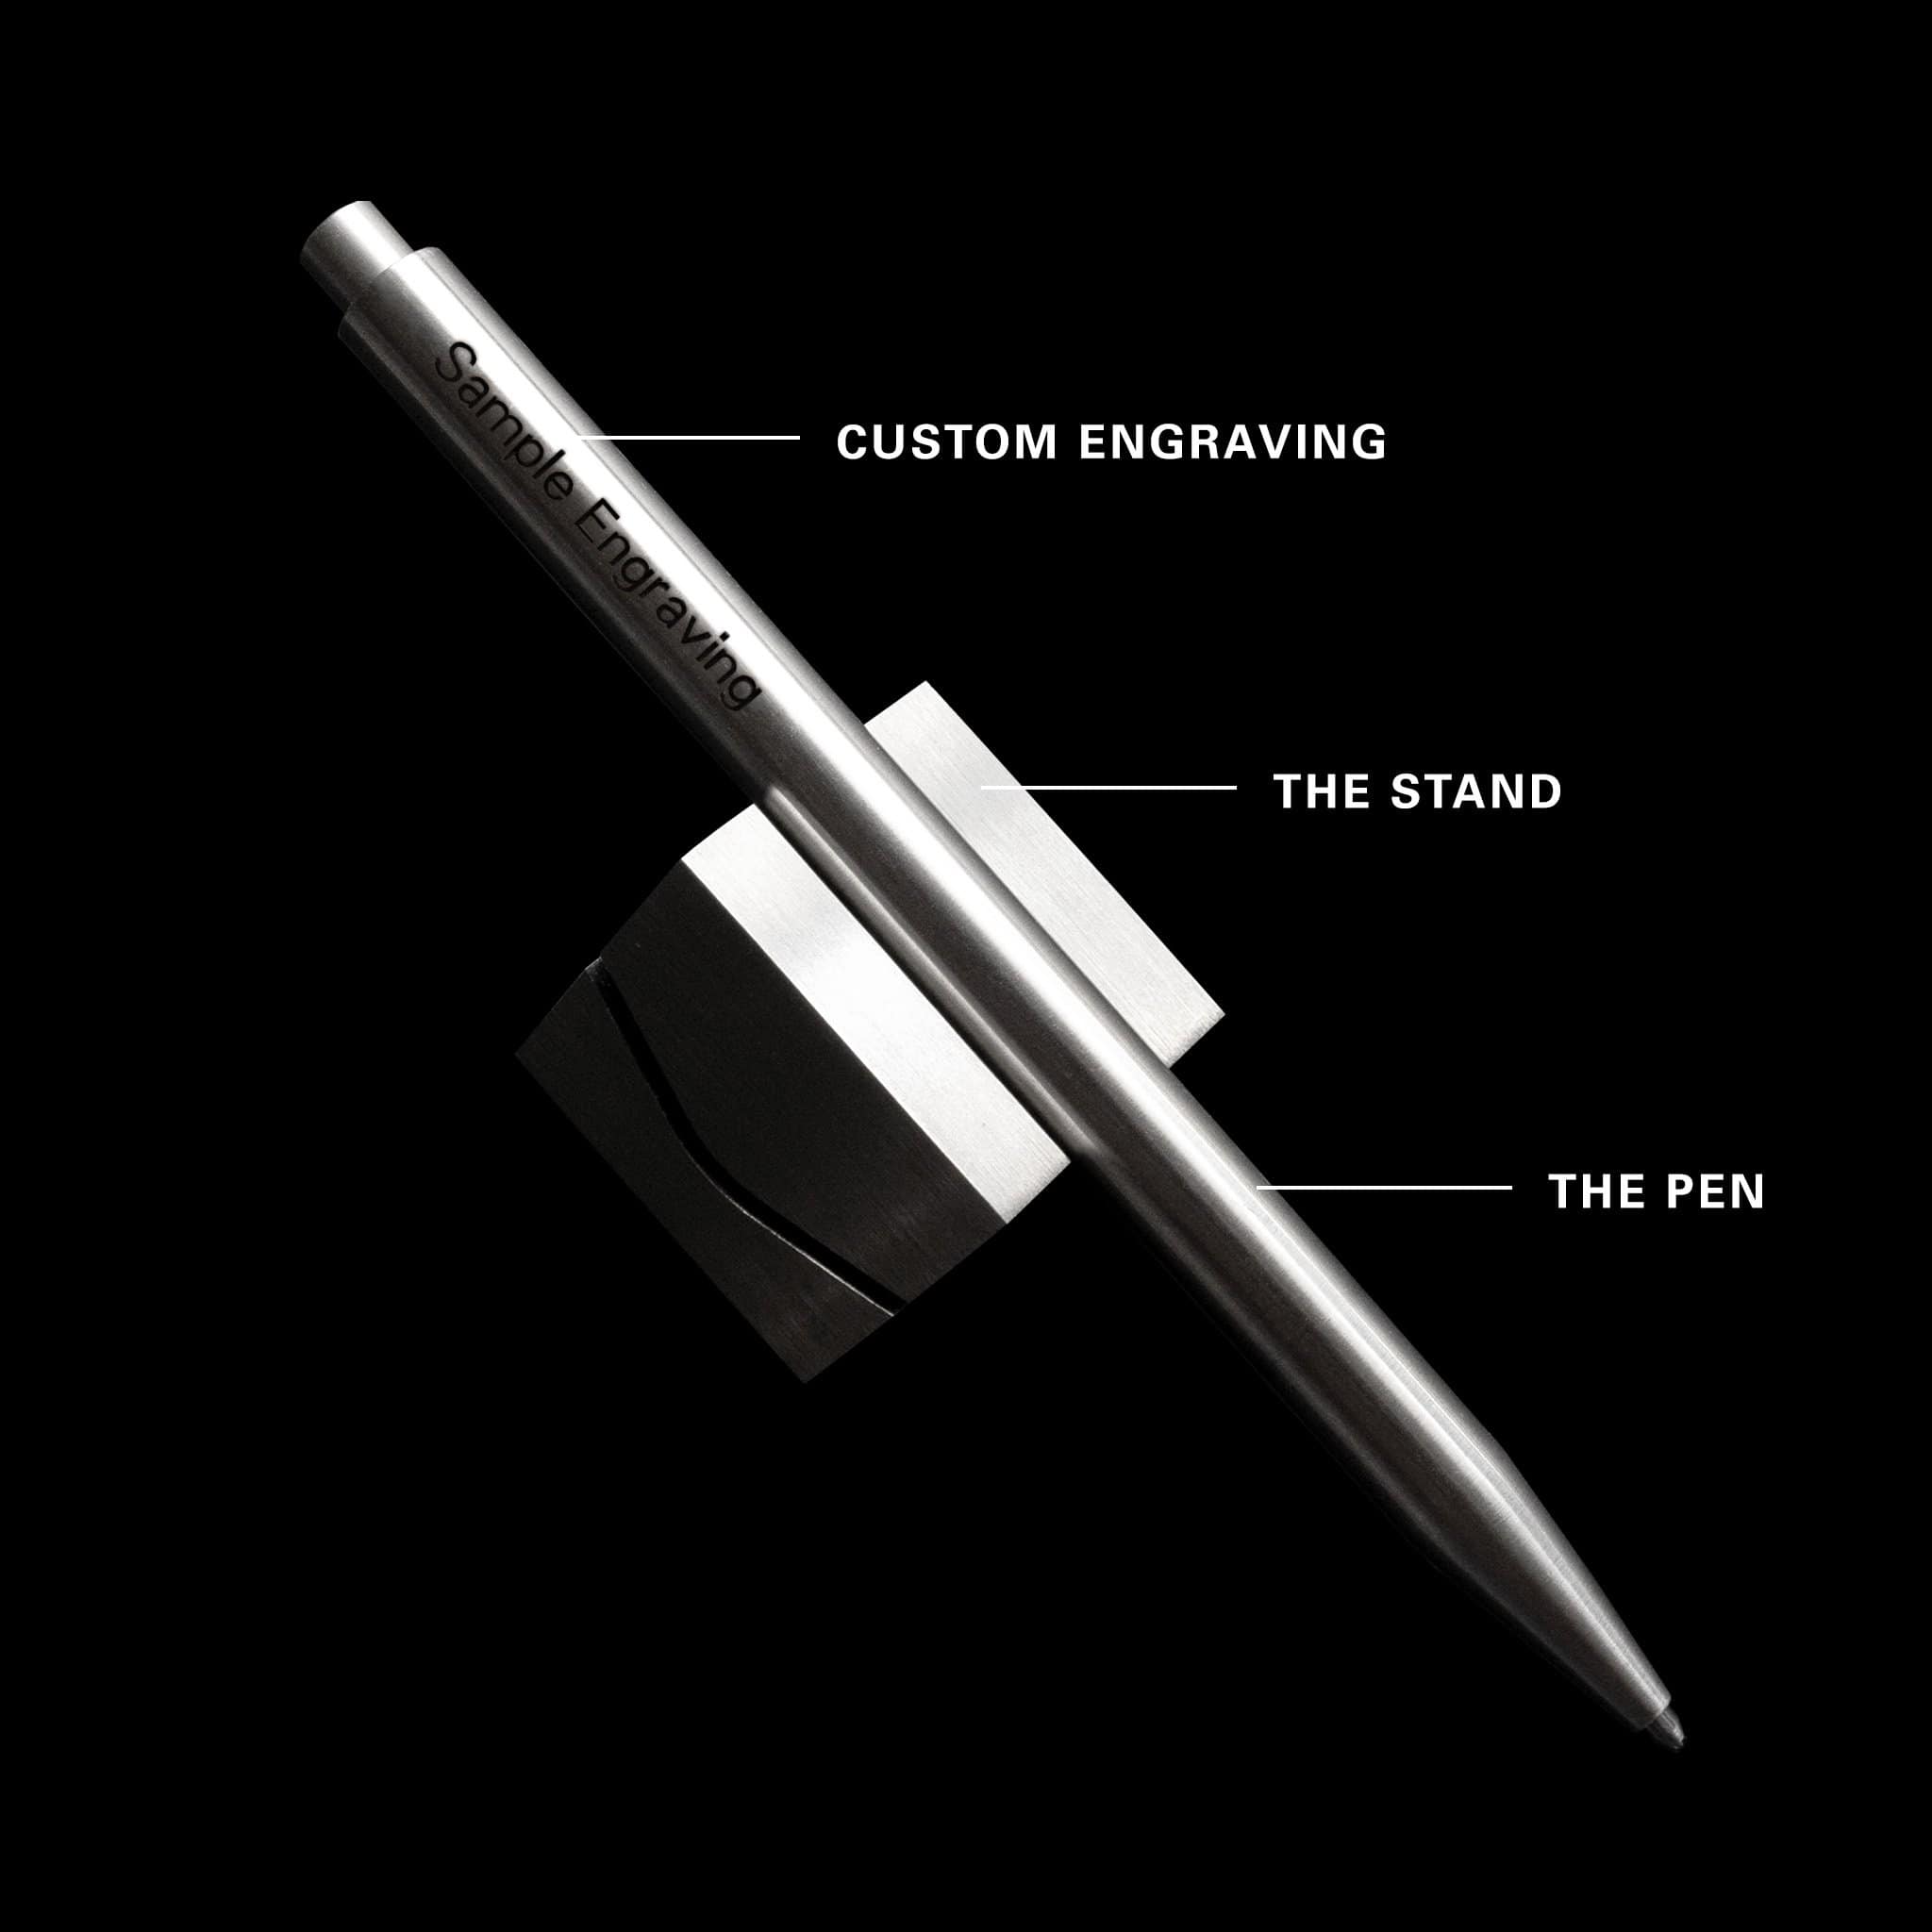 Engraving Pen by Tool Solutions Product review 